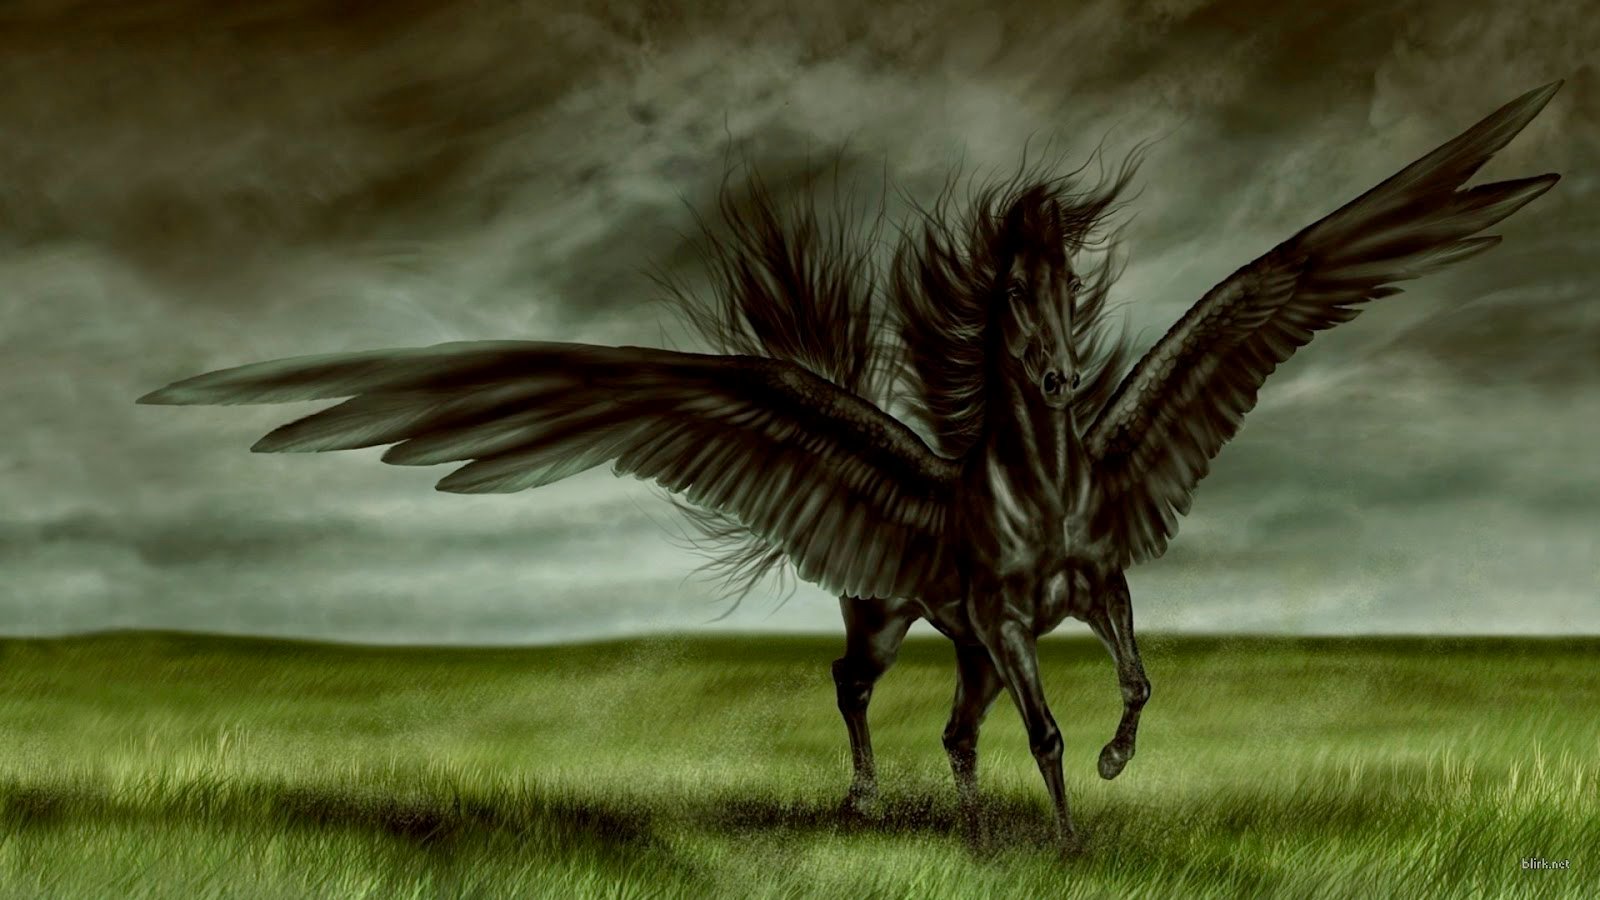 All Wallpapers Black Horse New Best hd Wallpapers 2013